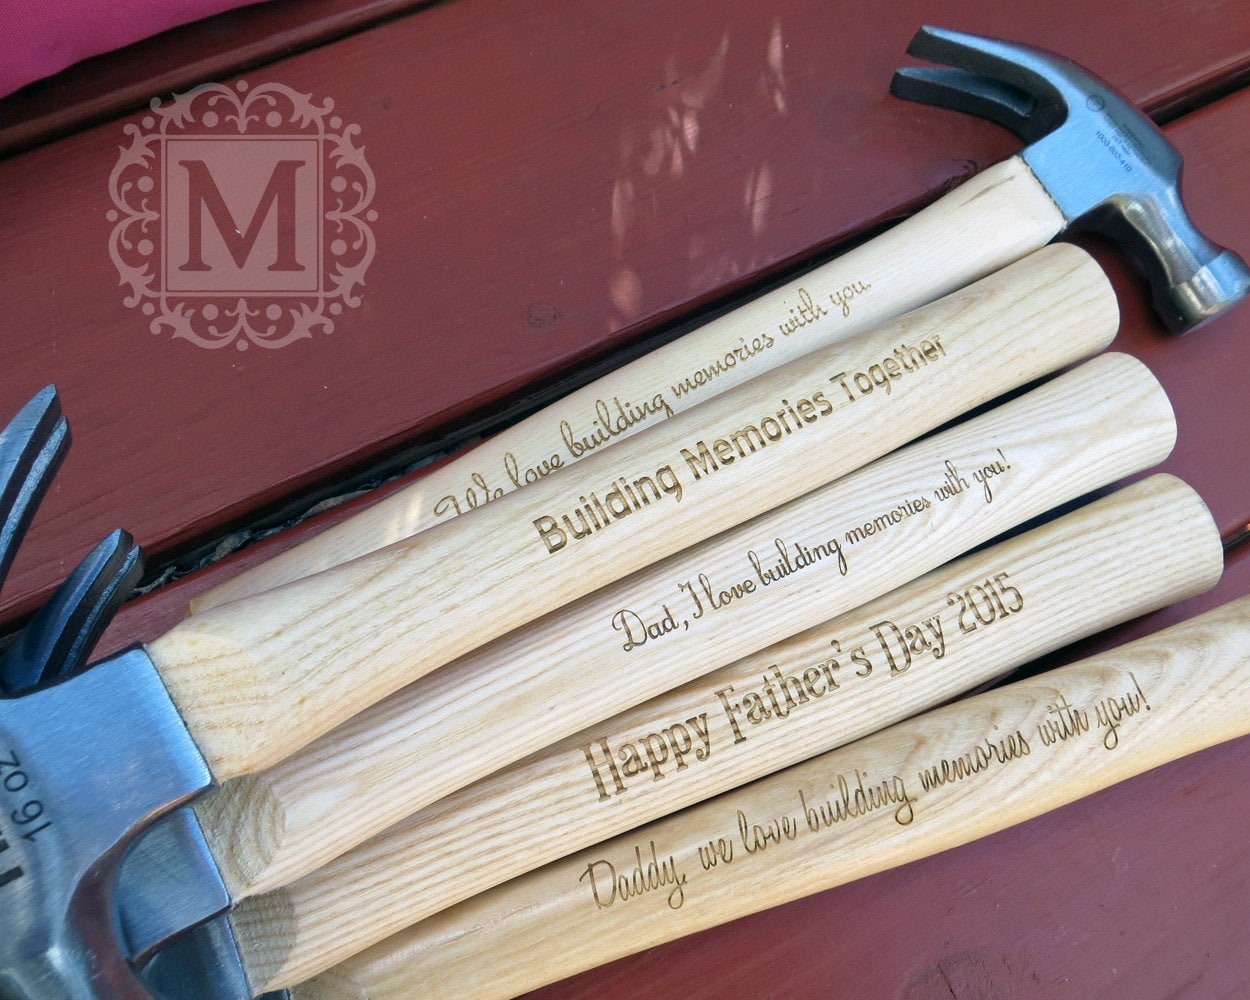  5th  Anniversary  gift  Wood Engraved Personalized Hammer 